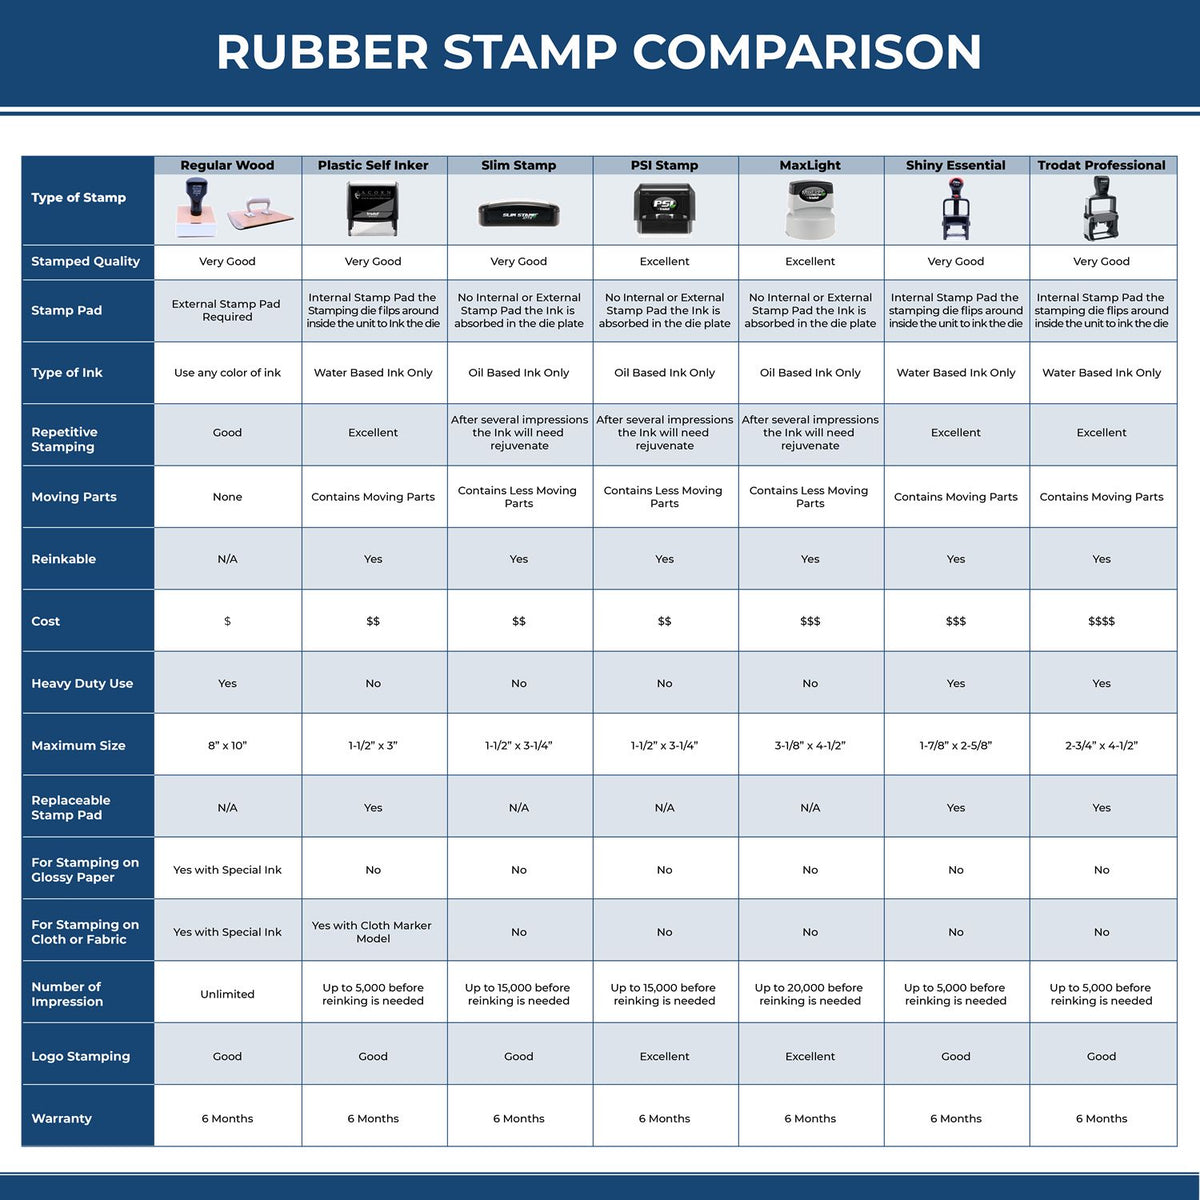 Large Self-Inking Bold Allergies Stamp 4855S Rubber Stamp Comparison